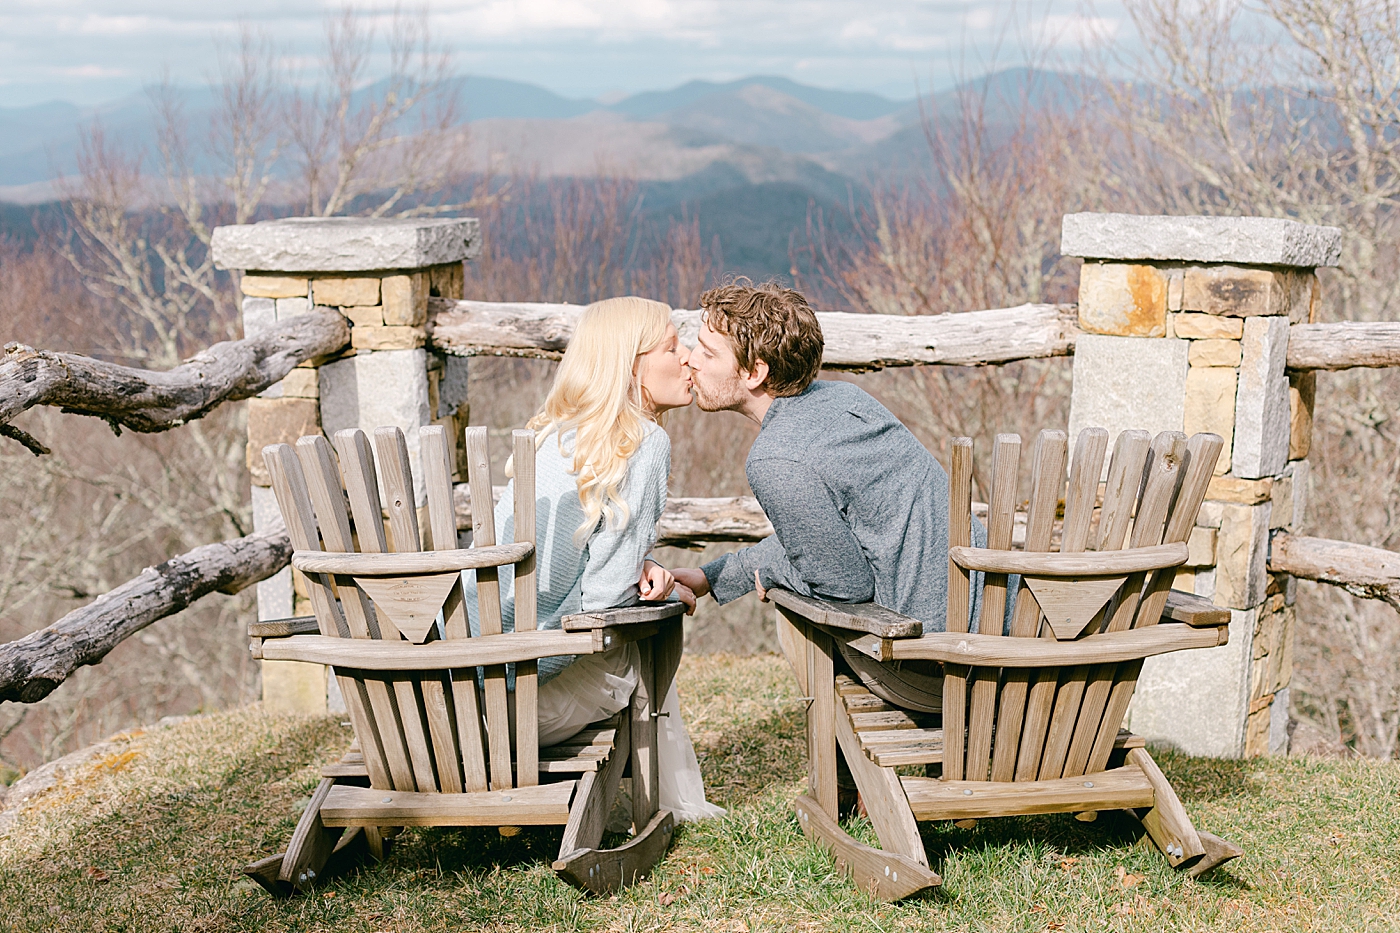 Couple sitting in chairs kissing | Image by Hope Helmuth Photography